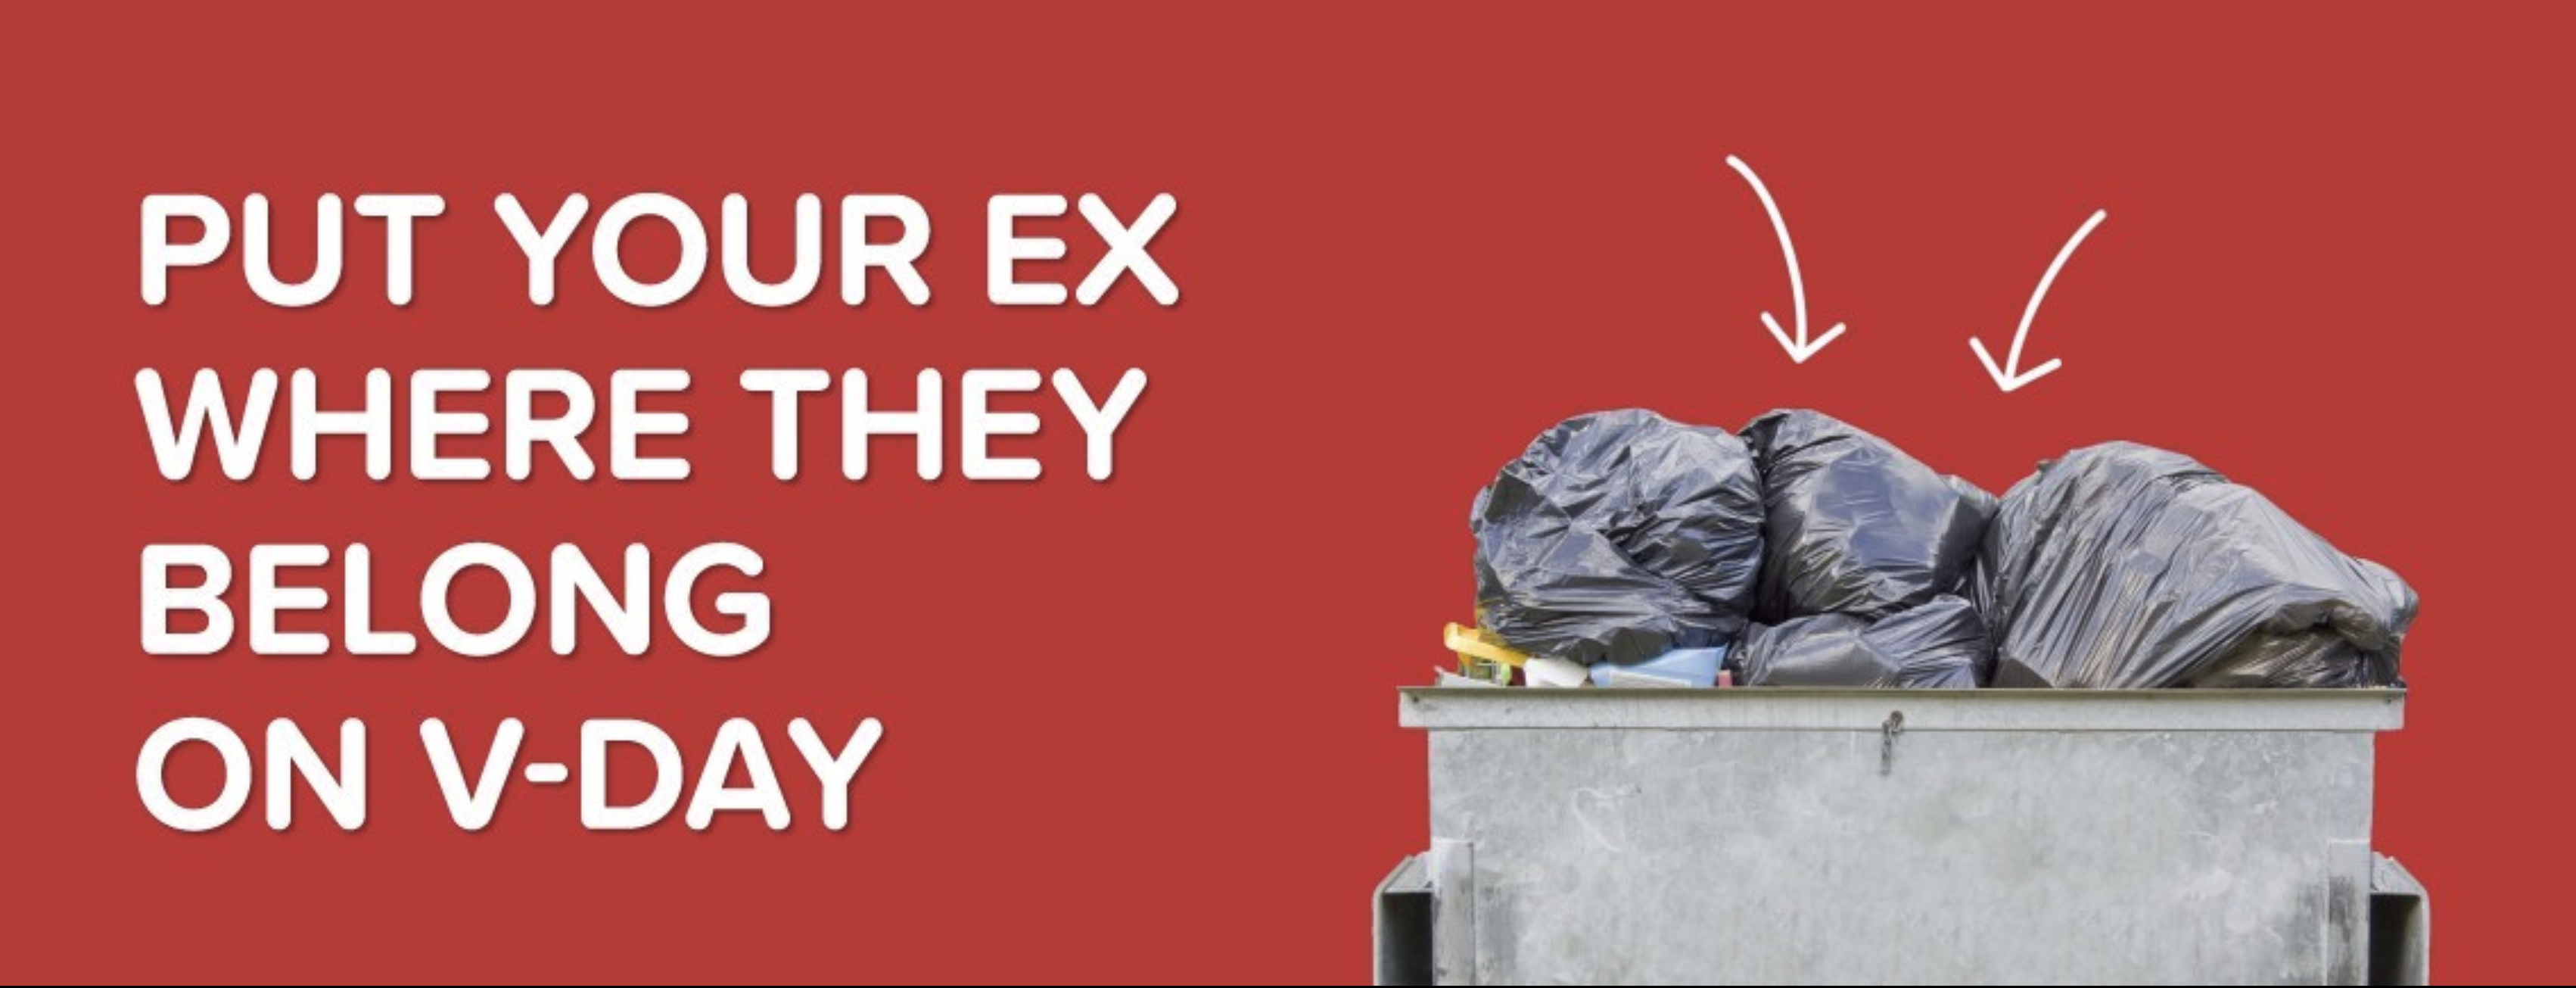 Hotels.com's Valentine's Day marketing campaign showing a dumpster against a red background. 